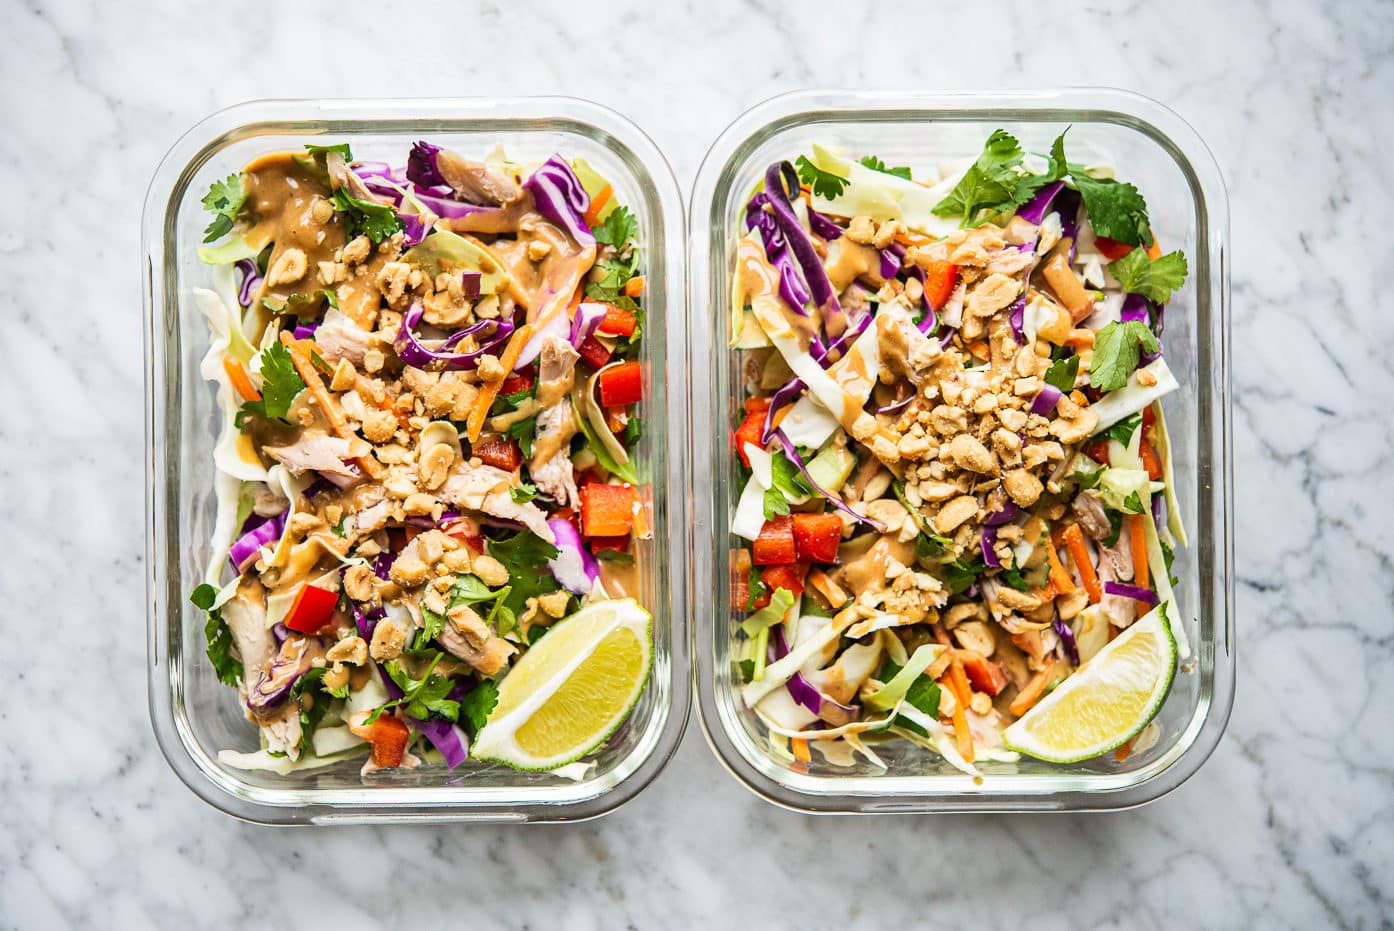 Meal Prep Lunch_Thai Salad and Quinoa SW Salad_FULL SIZE-01 (1)